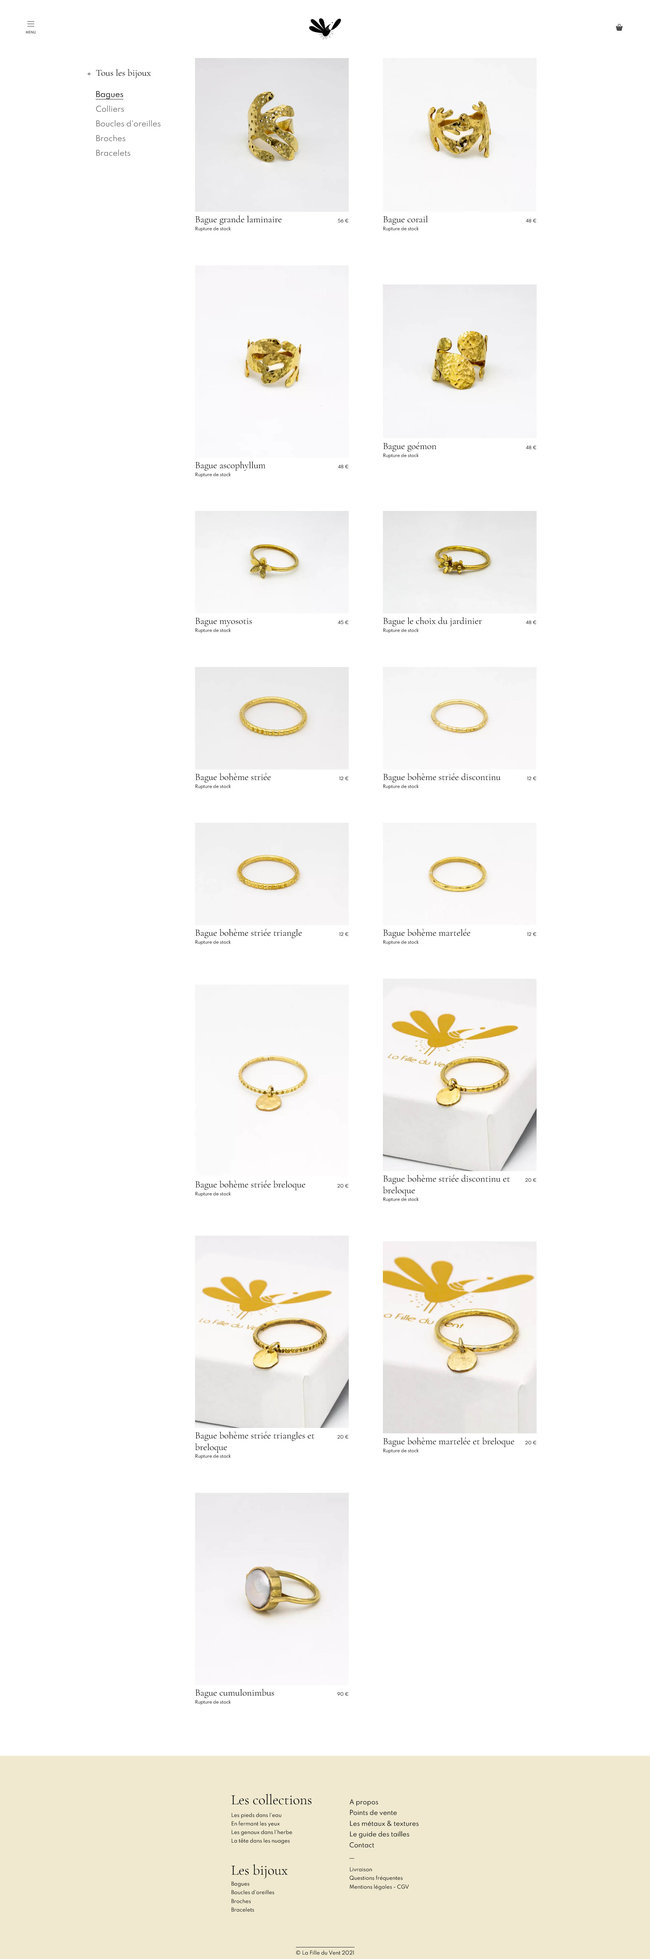 List of the rings sold on the online shop.